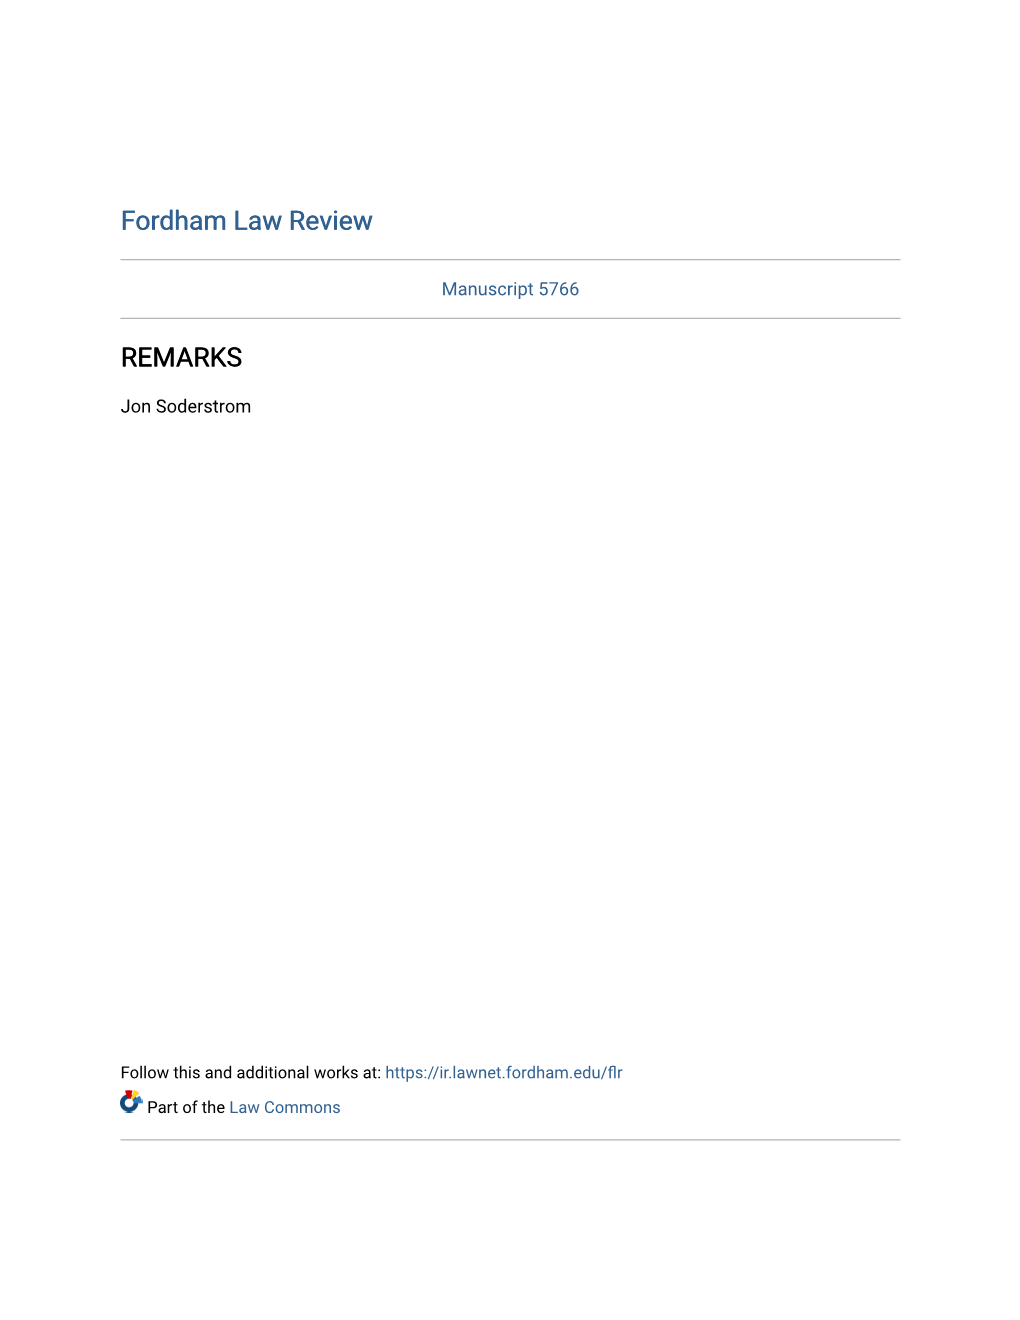 Fordham Law Review REMARKS